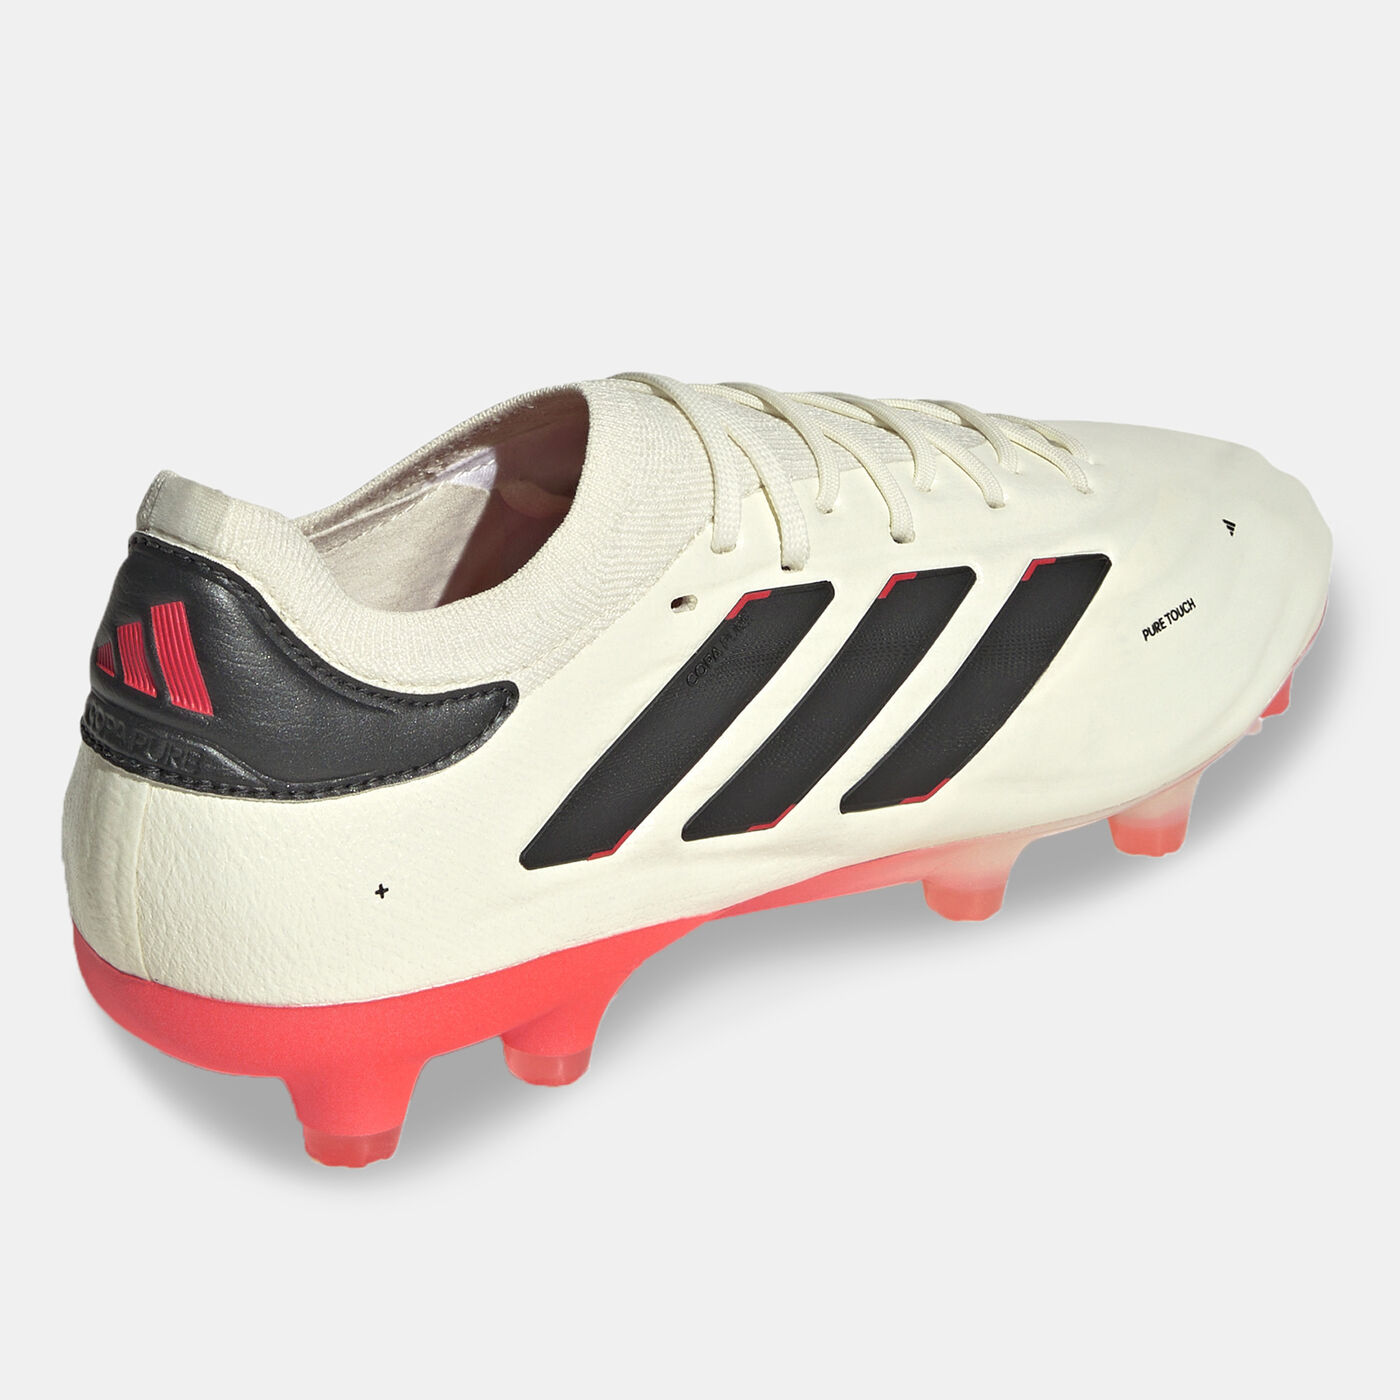 Men's Copa Pure 2 League Firm-Ground Football Shoes